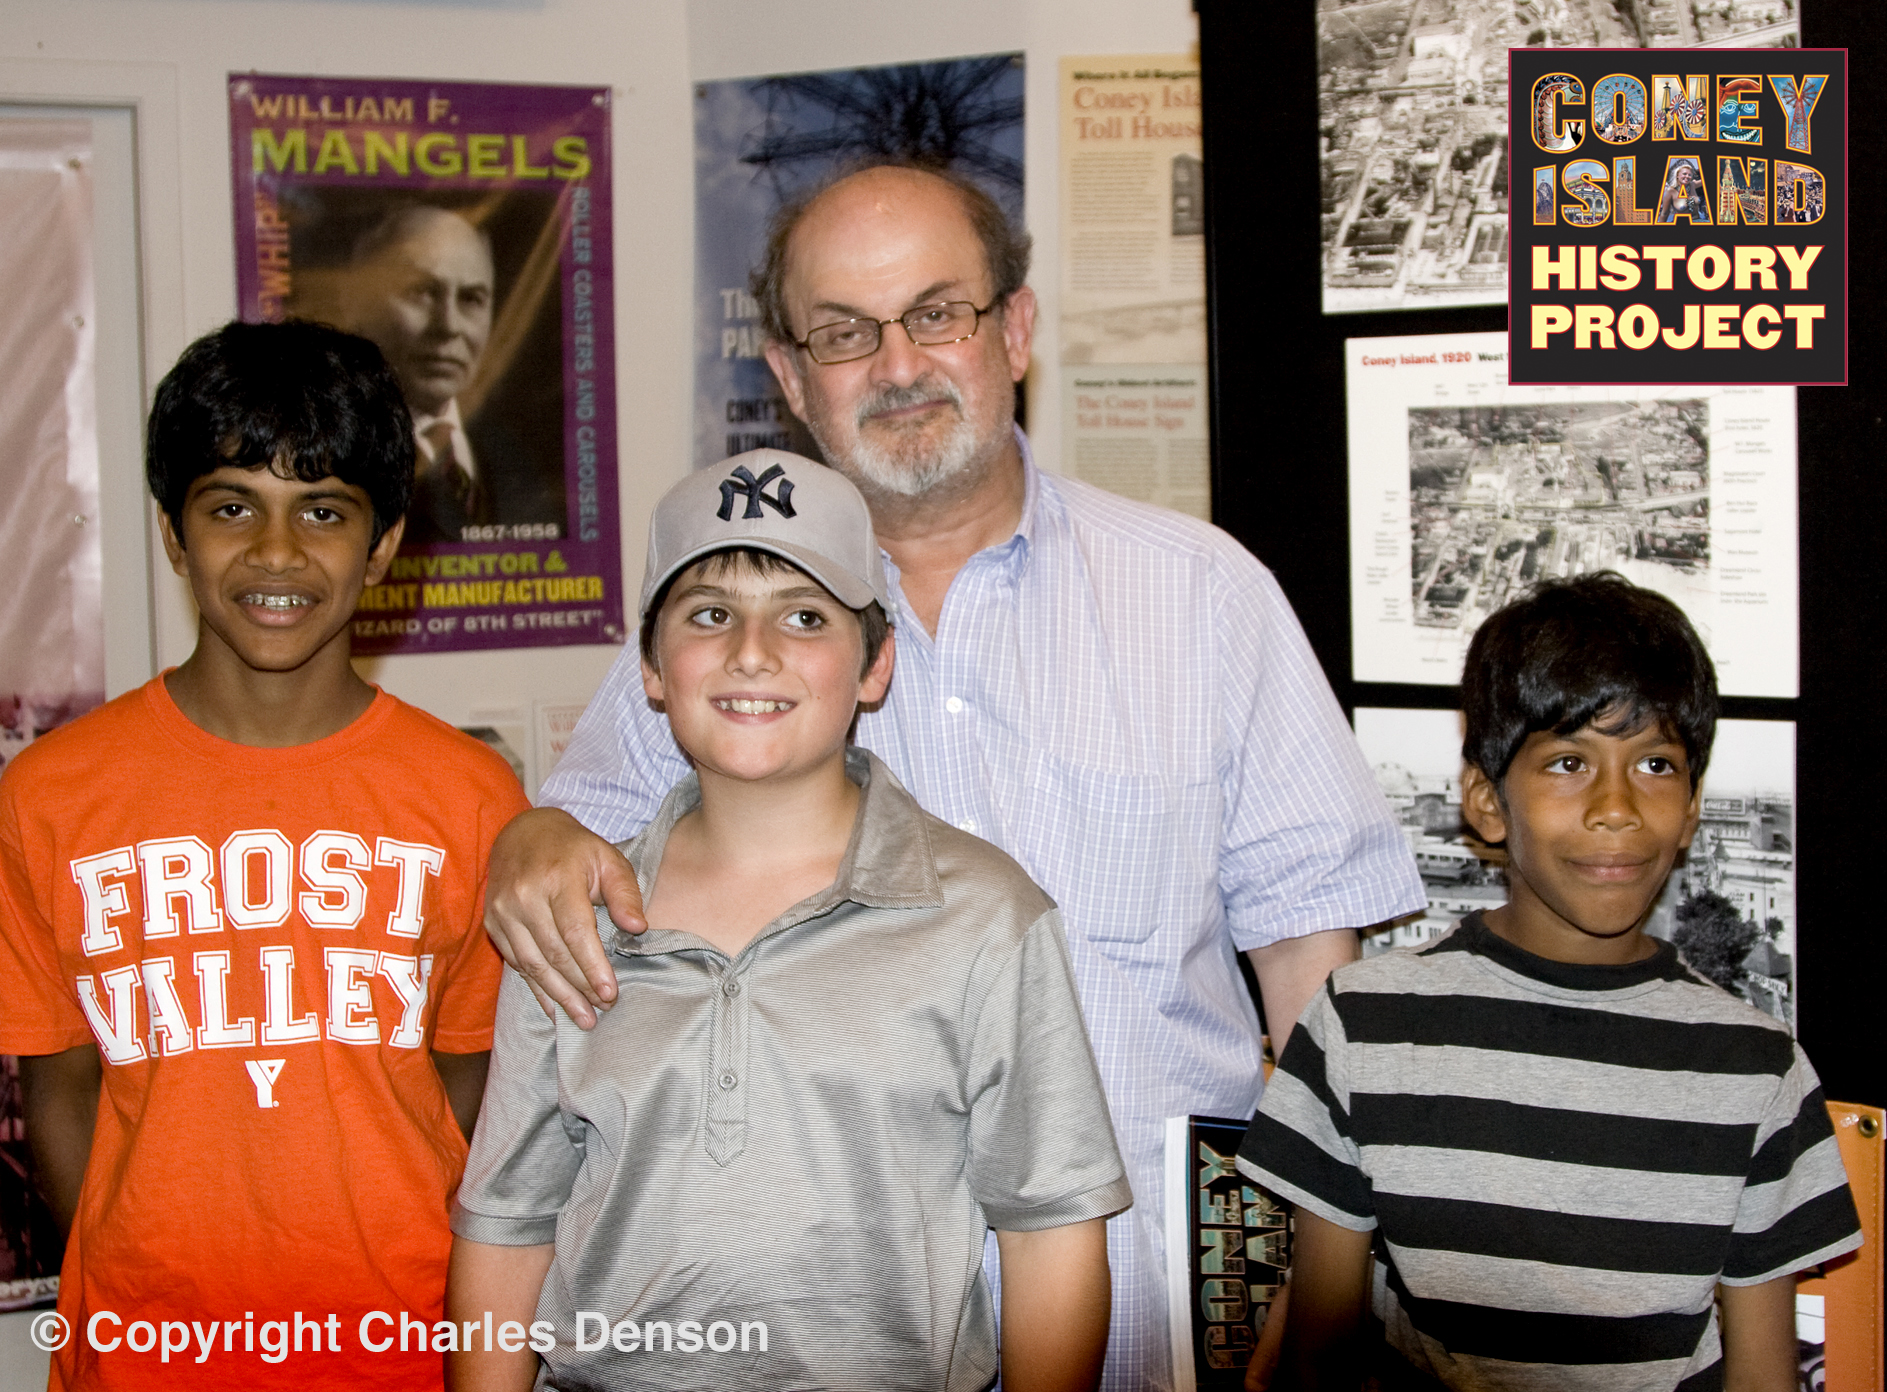 Salman Rushdie at the Coney Island History Project